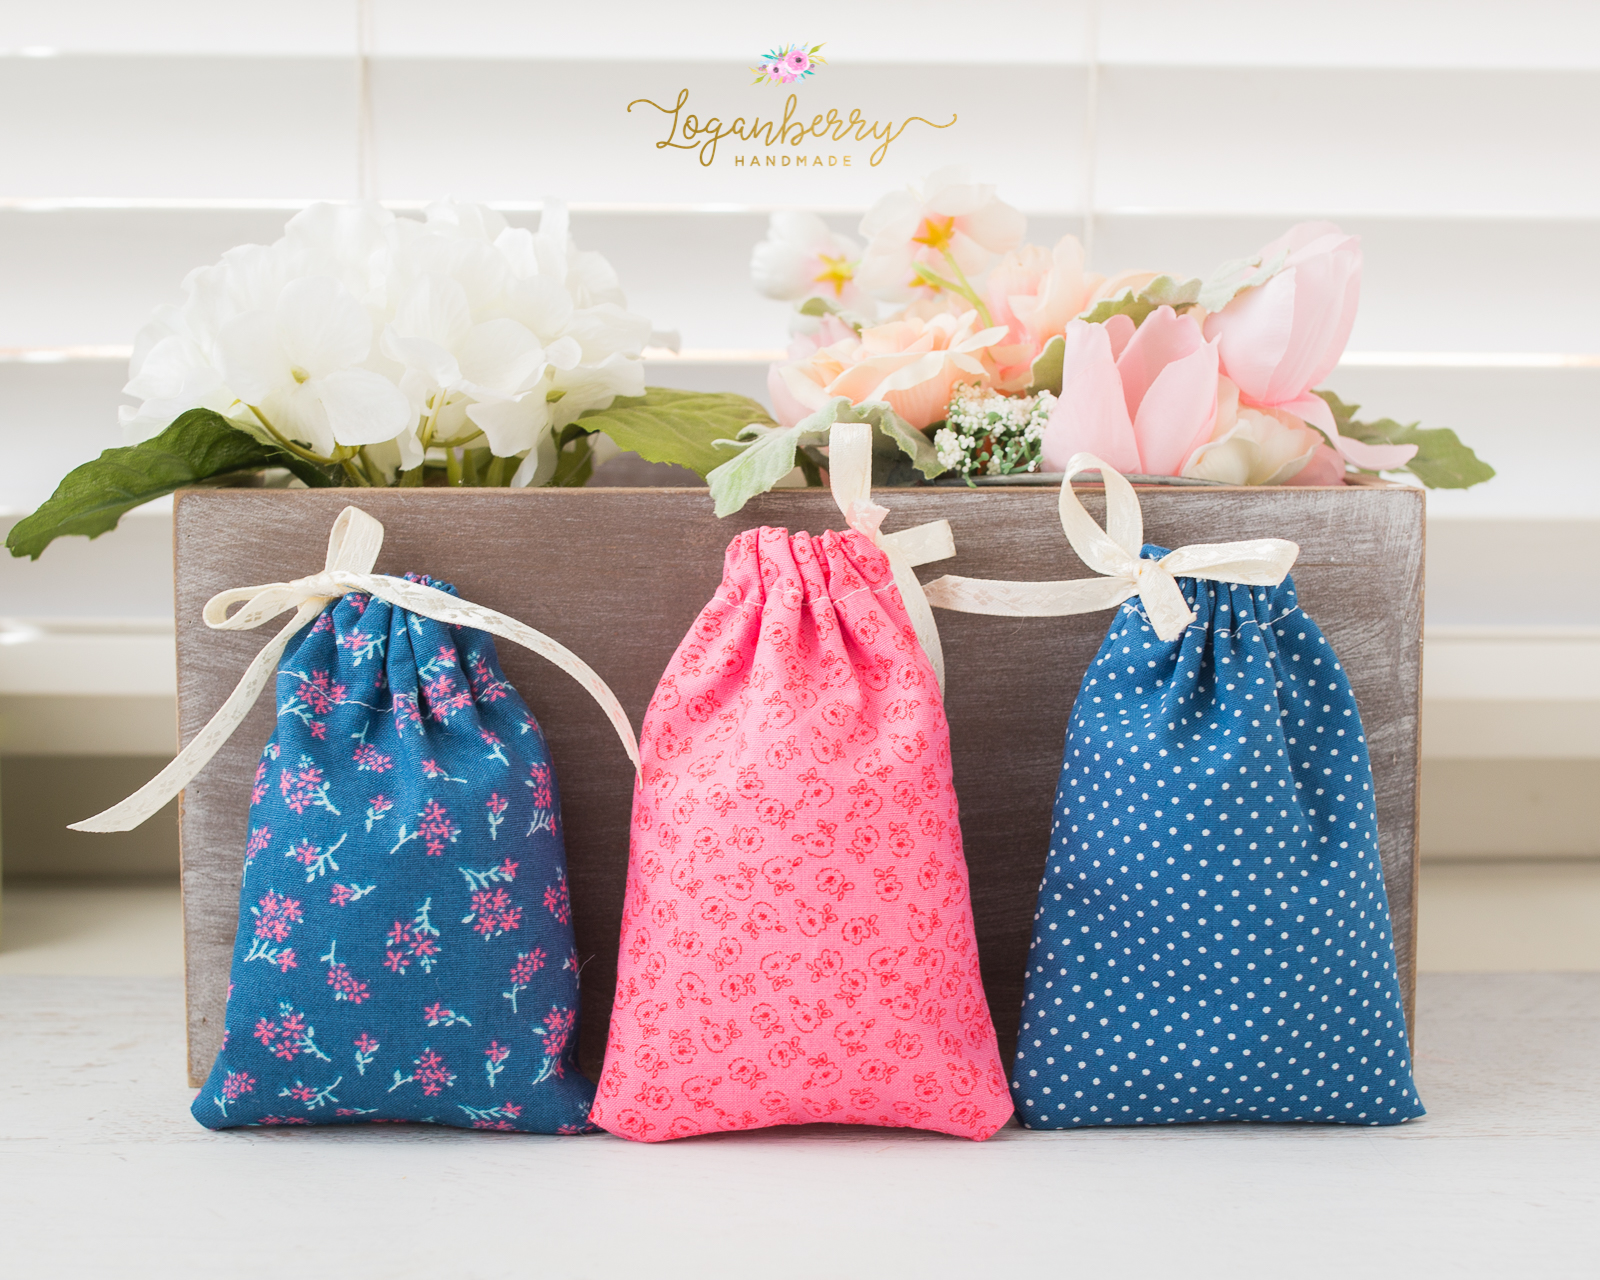 Diy Designer gift bags made in less than 5 min 